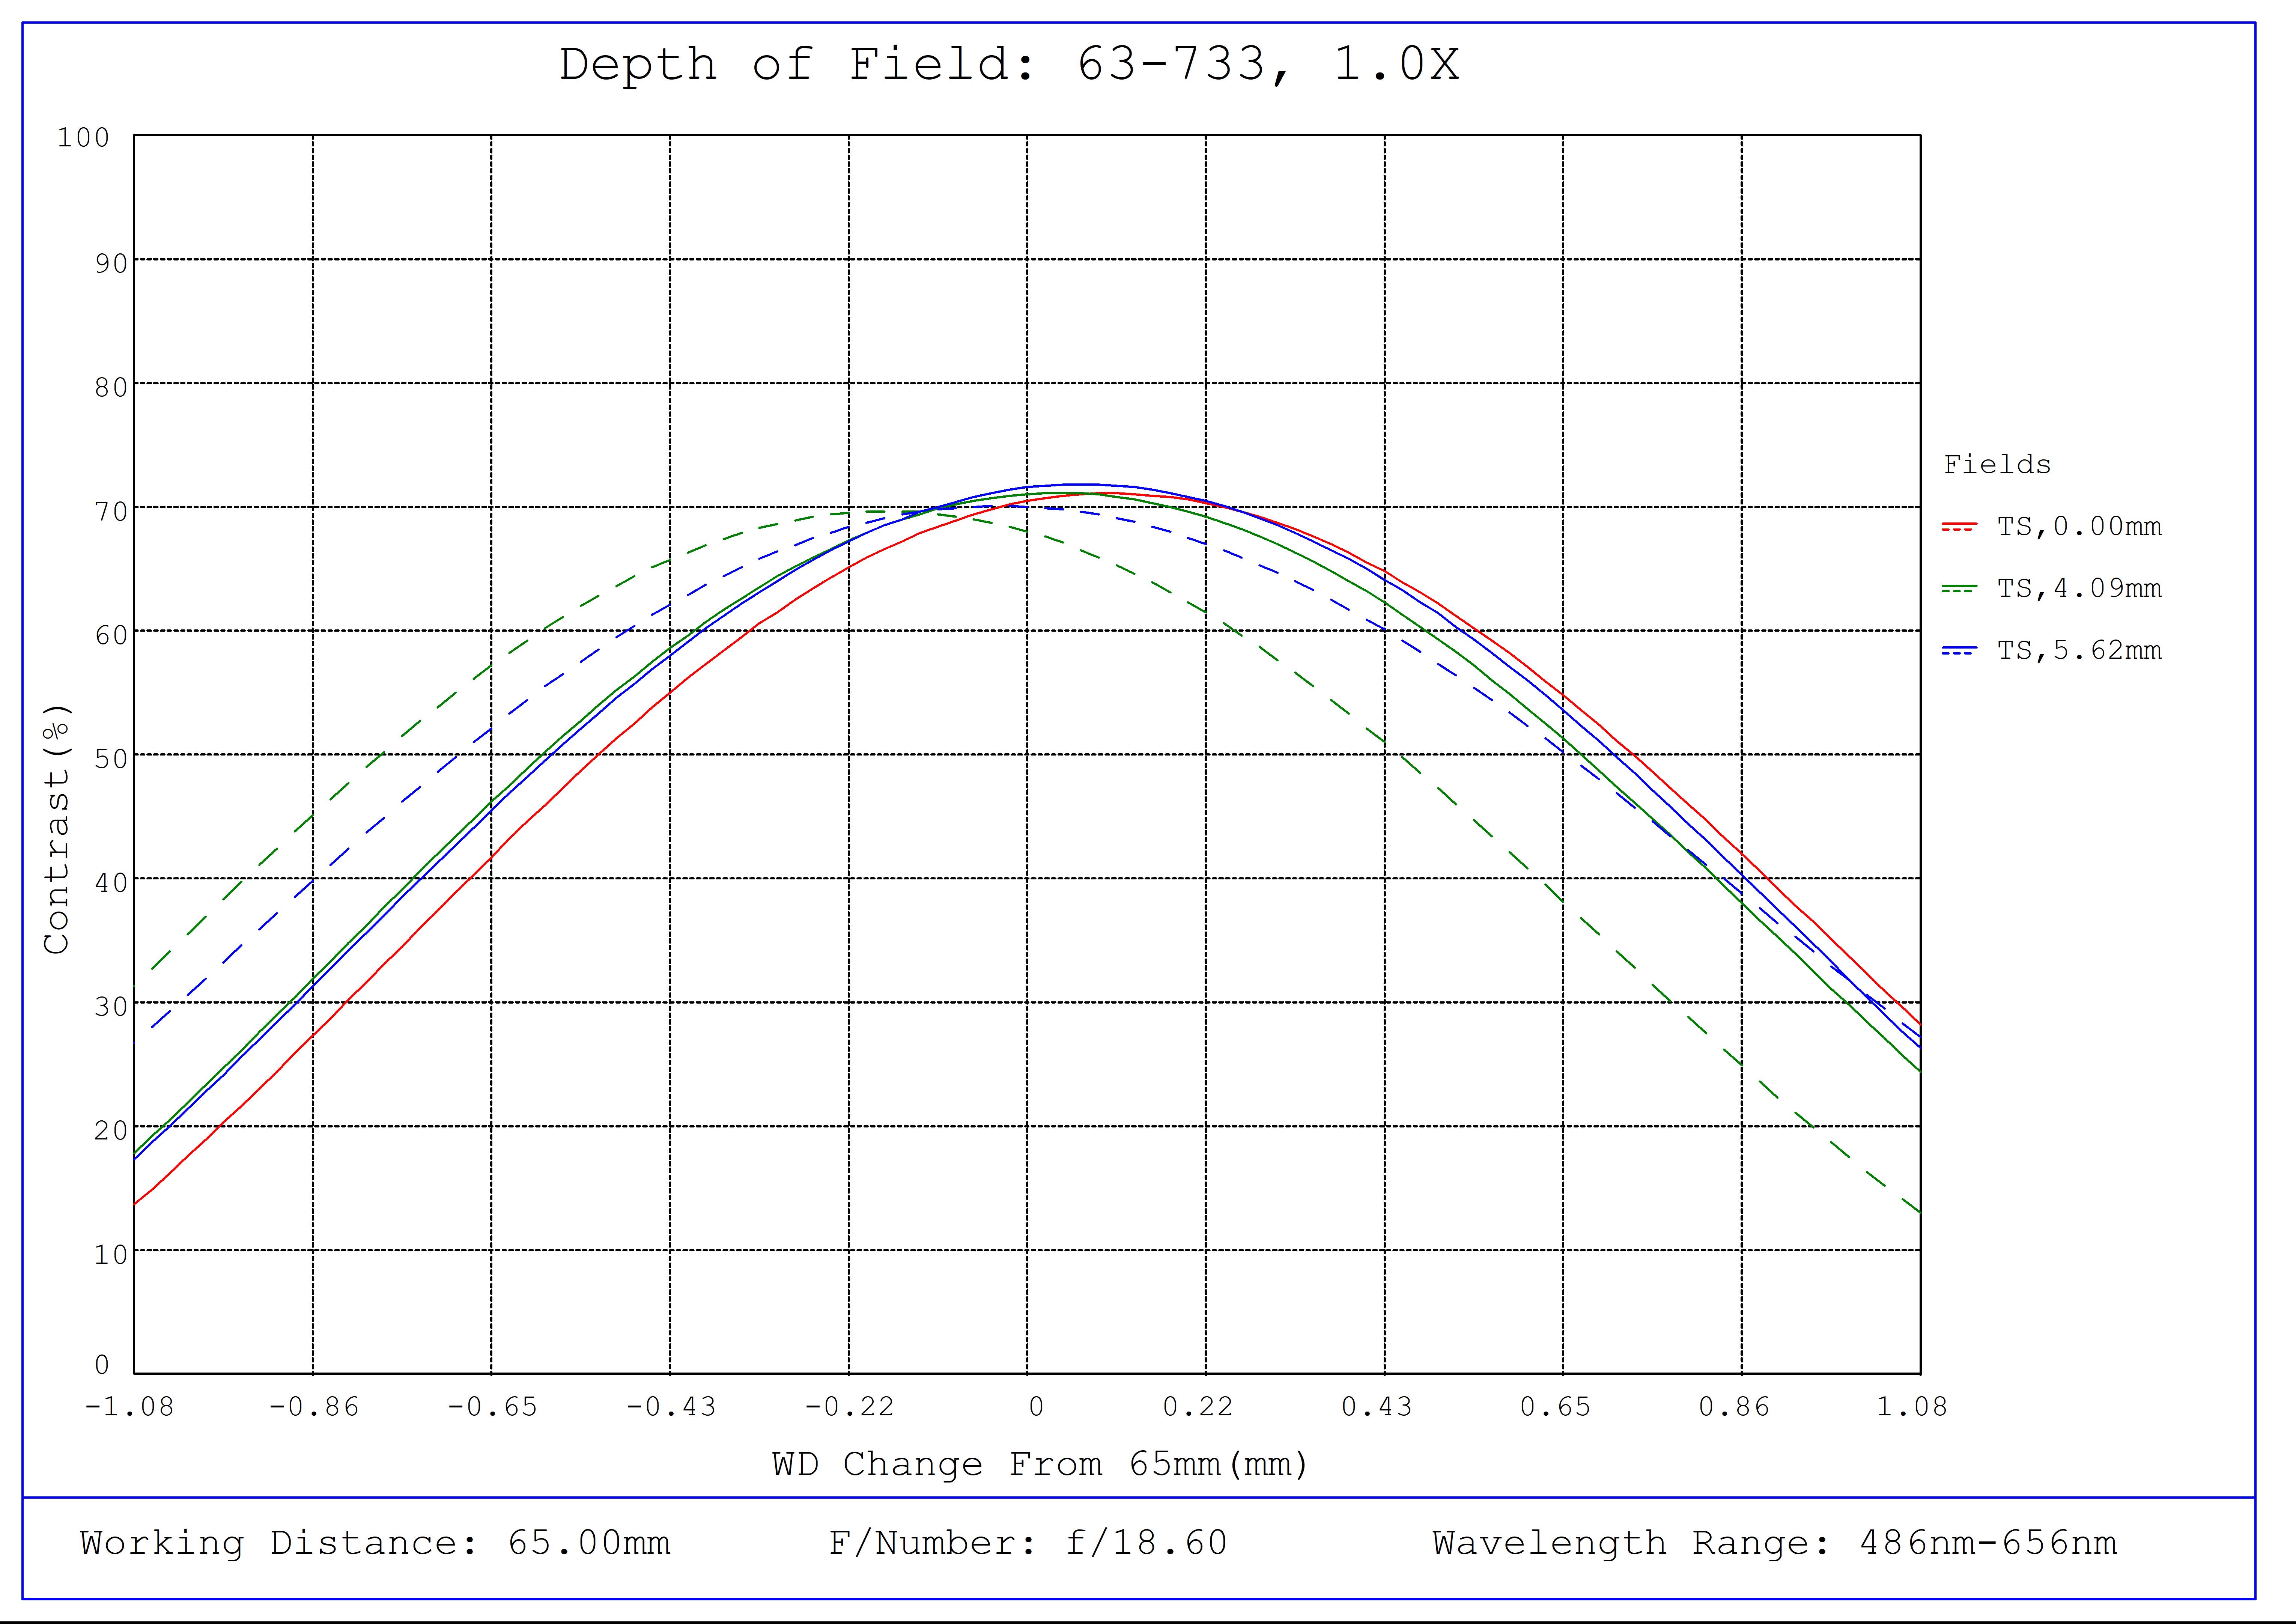 #63-733, 1X, 65mm WD CompactTL™ Telecentric Lens, Depth of Field Plot, 65mm Working Distance, f18.6